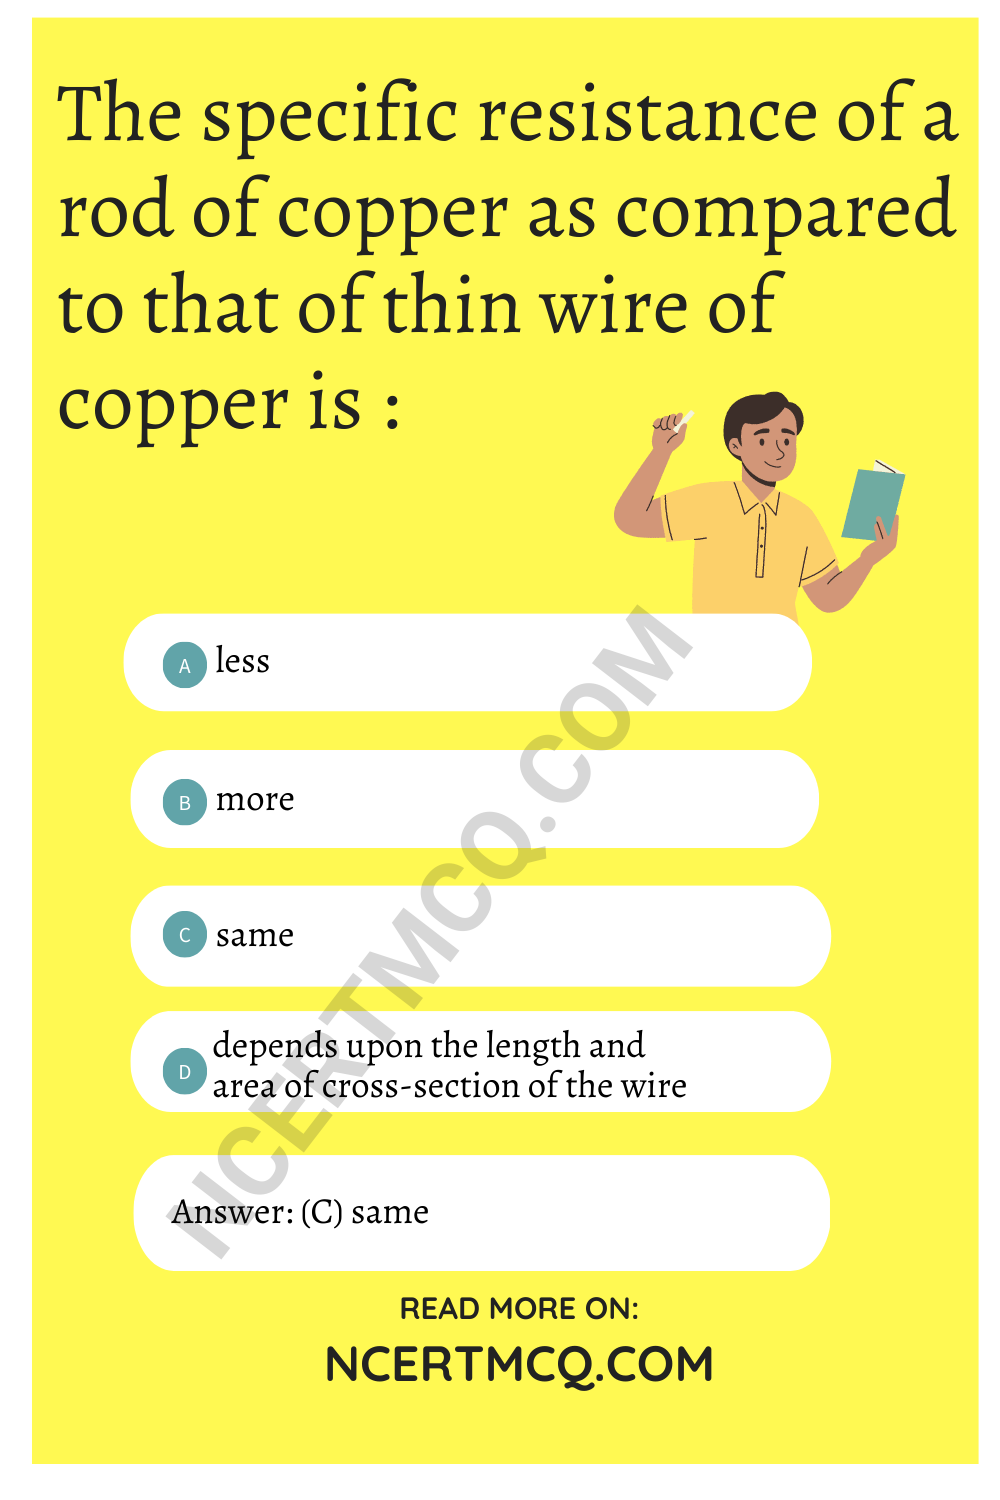 The specific resistance of a rod of copper as compared to that of thin wire of copper is :